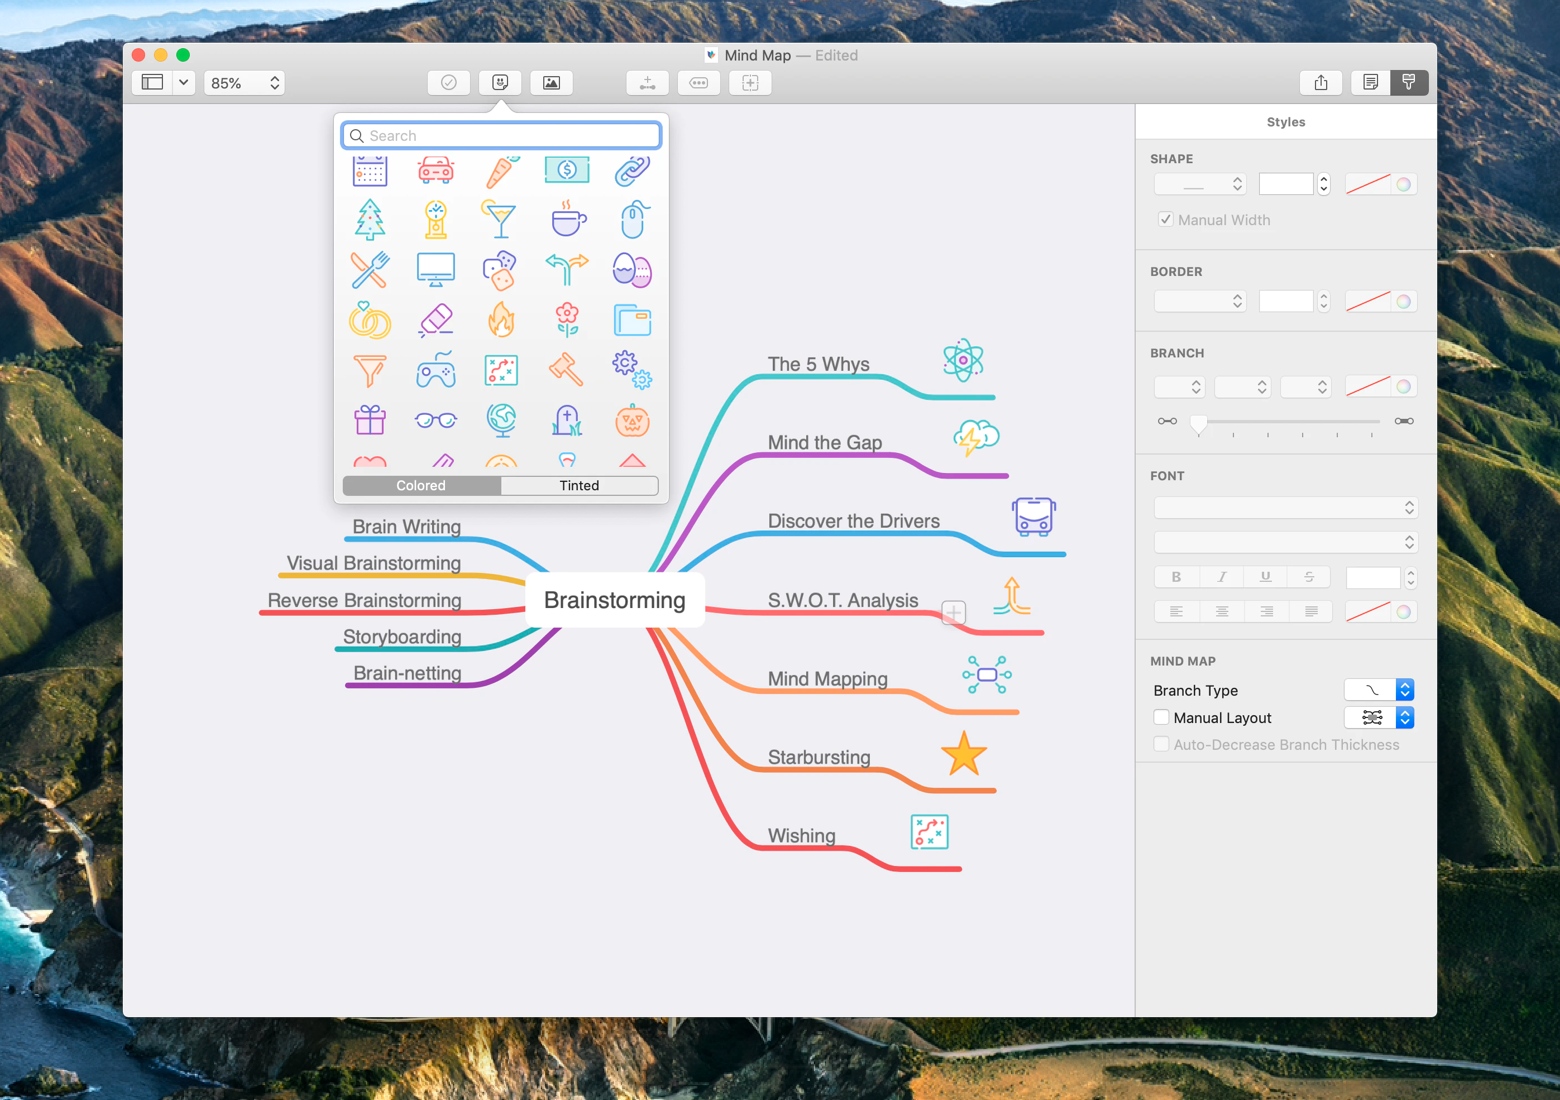 clip art and icons in a mind map